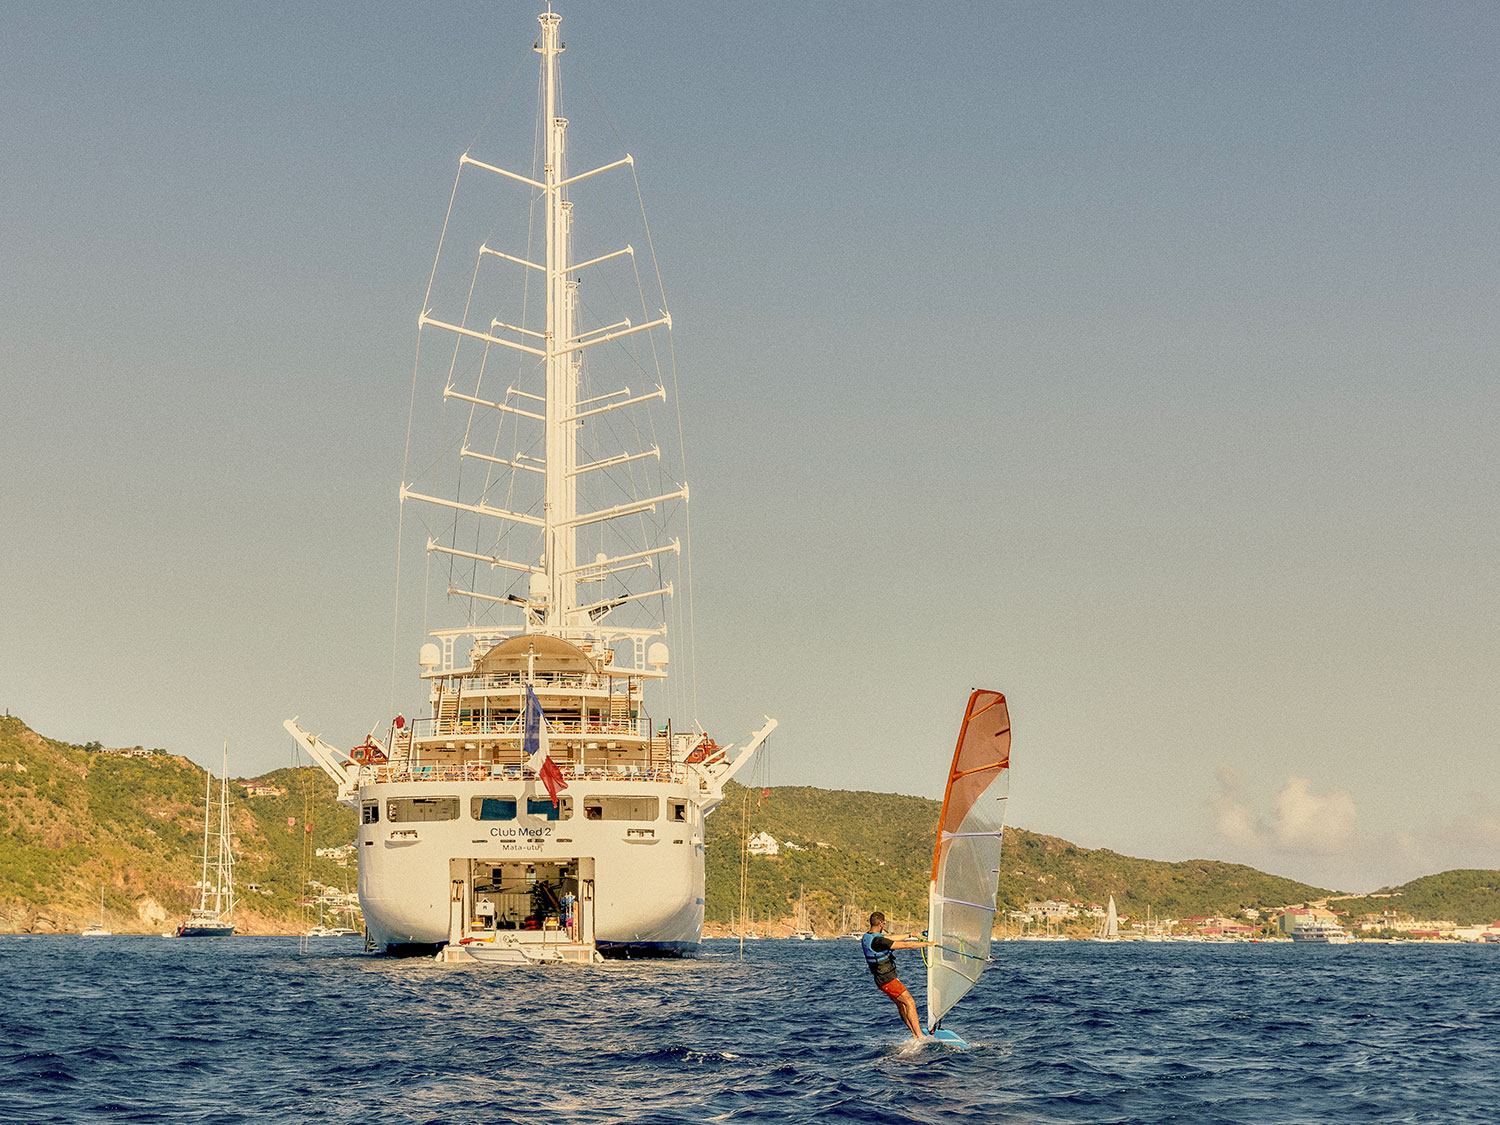 The rear view of the Club Med 2 luxury sailing yacht with a windsurfer following.